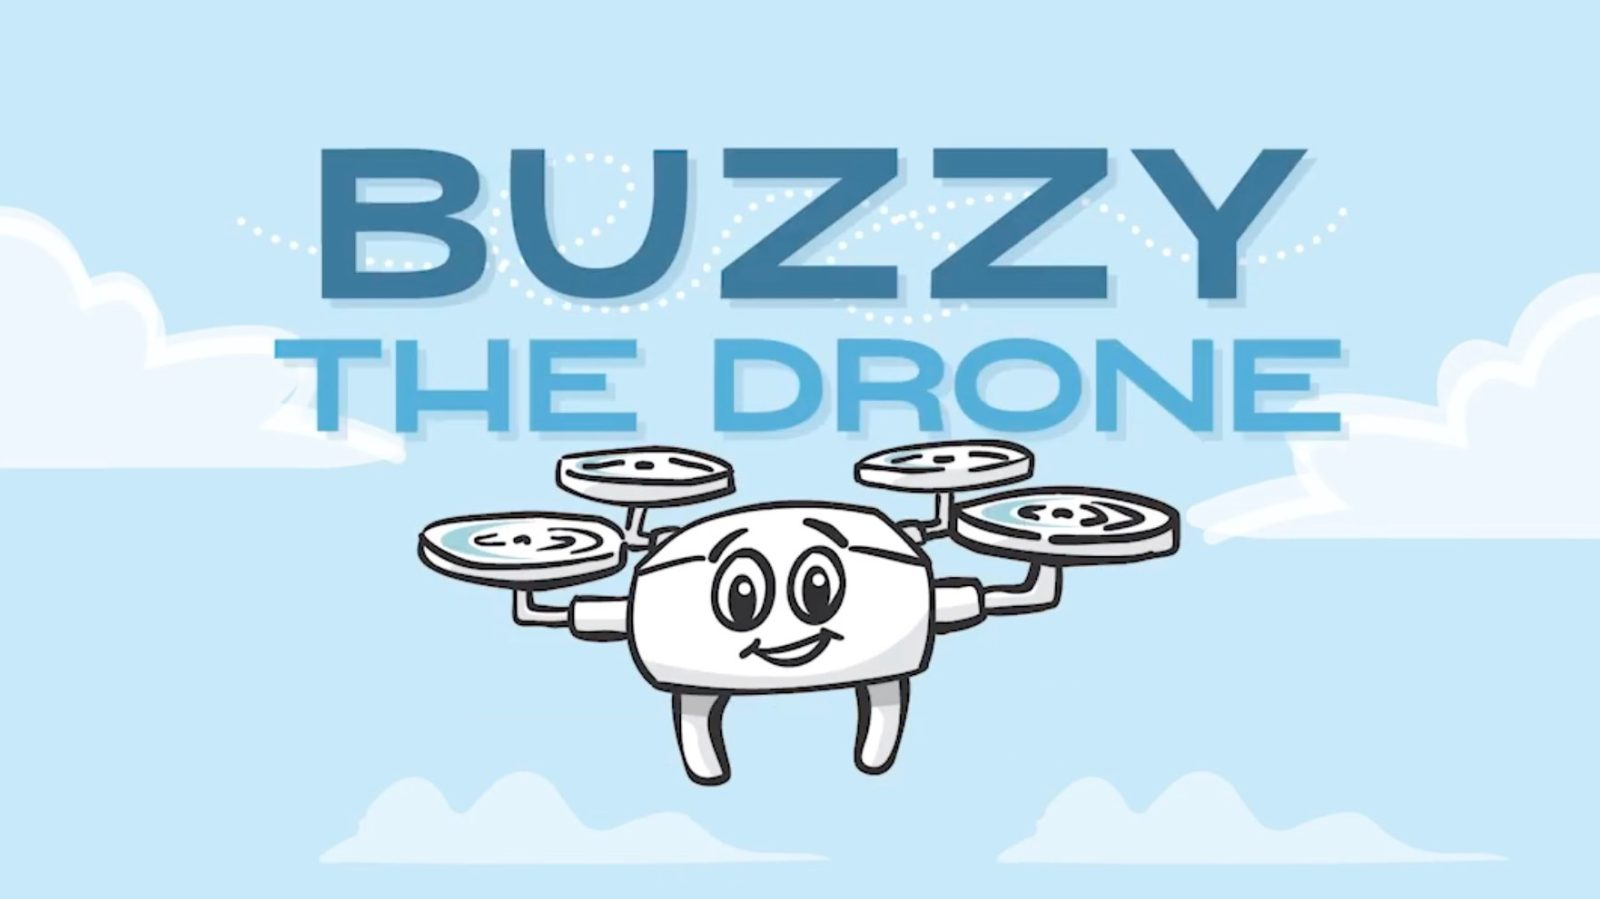 Buzzy the Drone, an FAA safety initiative for holiday drone sales